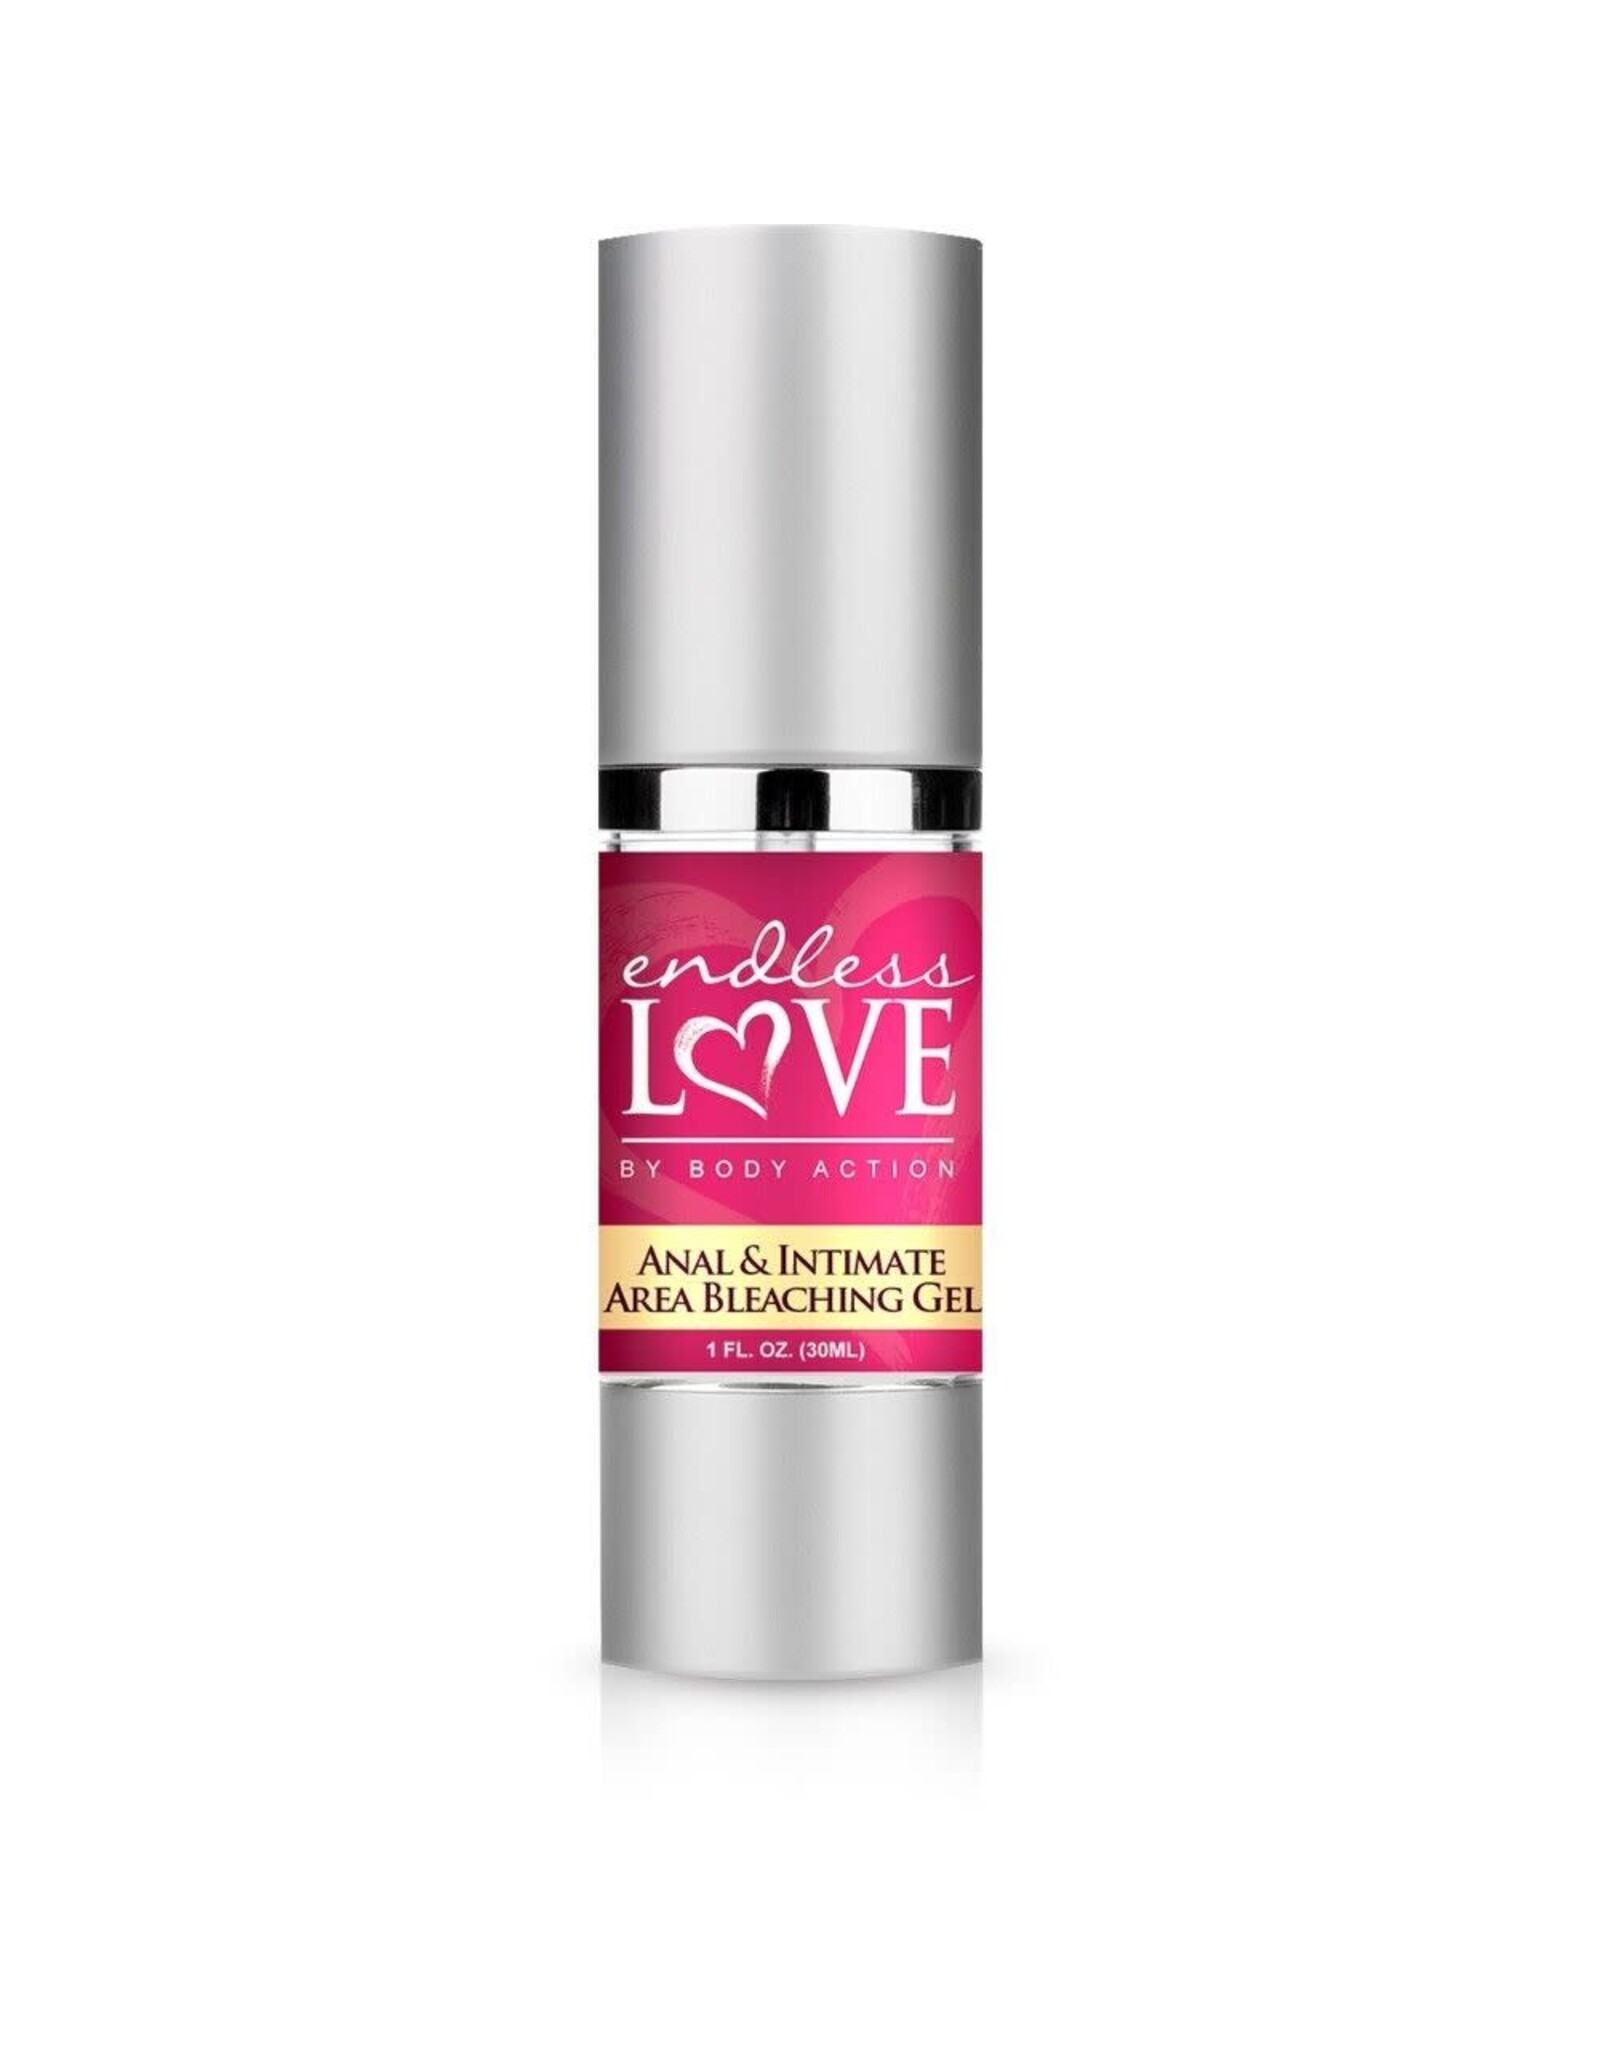 Body Action Endless Love Anal & Intimate Area Bleaching Gel 1.0 Oz